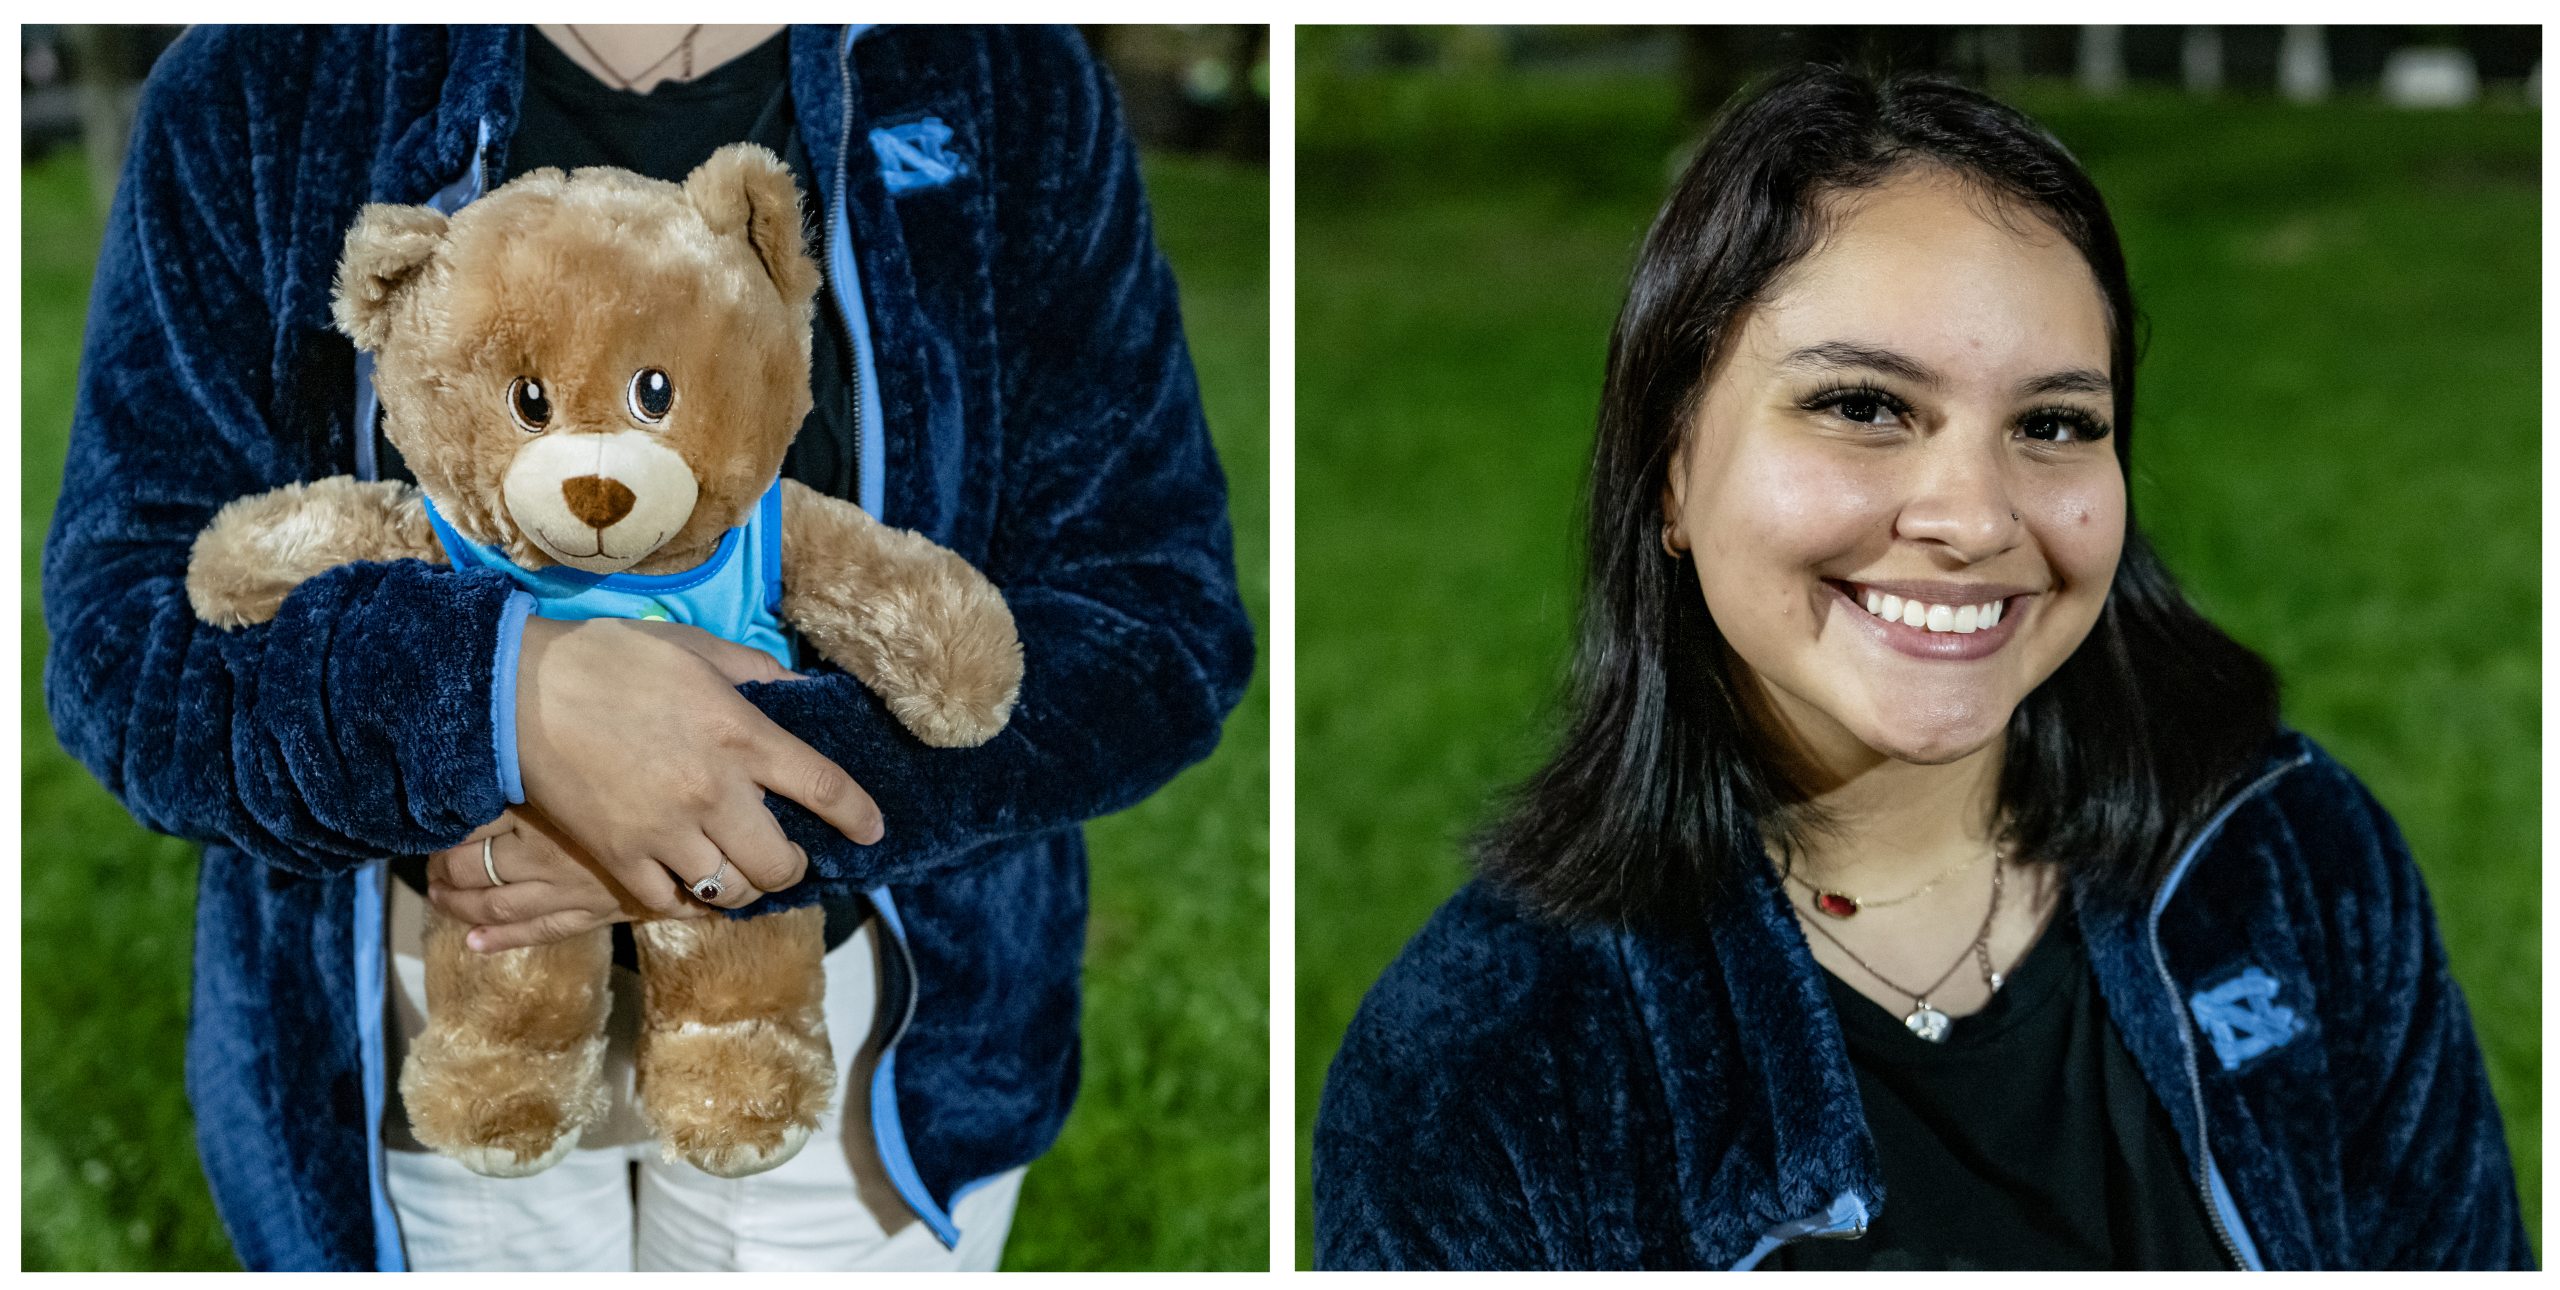 A two-photo collage: on the left is a picture of a teddy bear being held by a student named Vanessa Ibara, and on the right is a portrait of Vanessa.